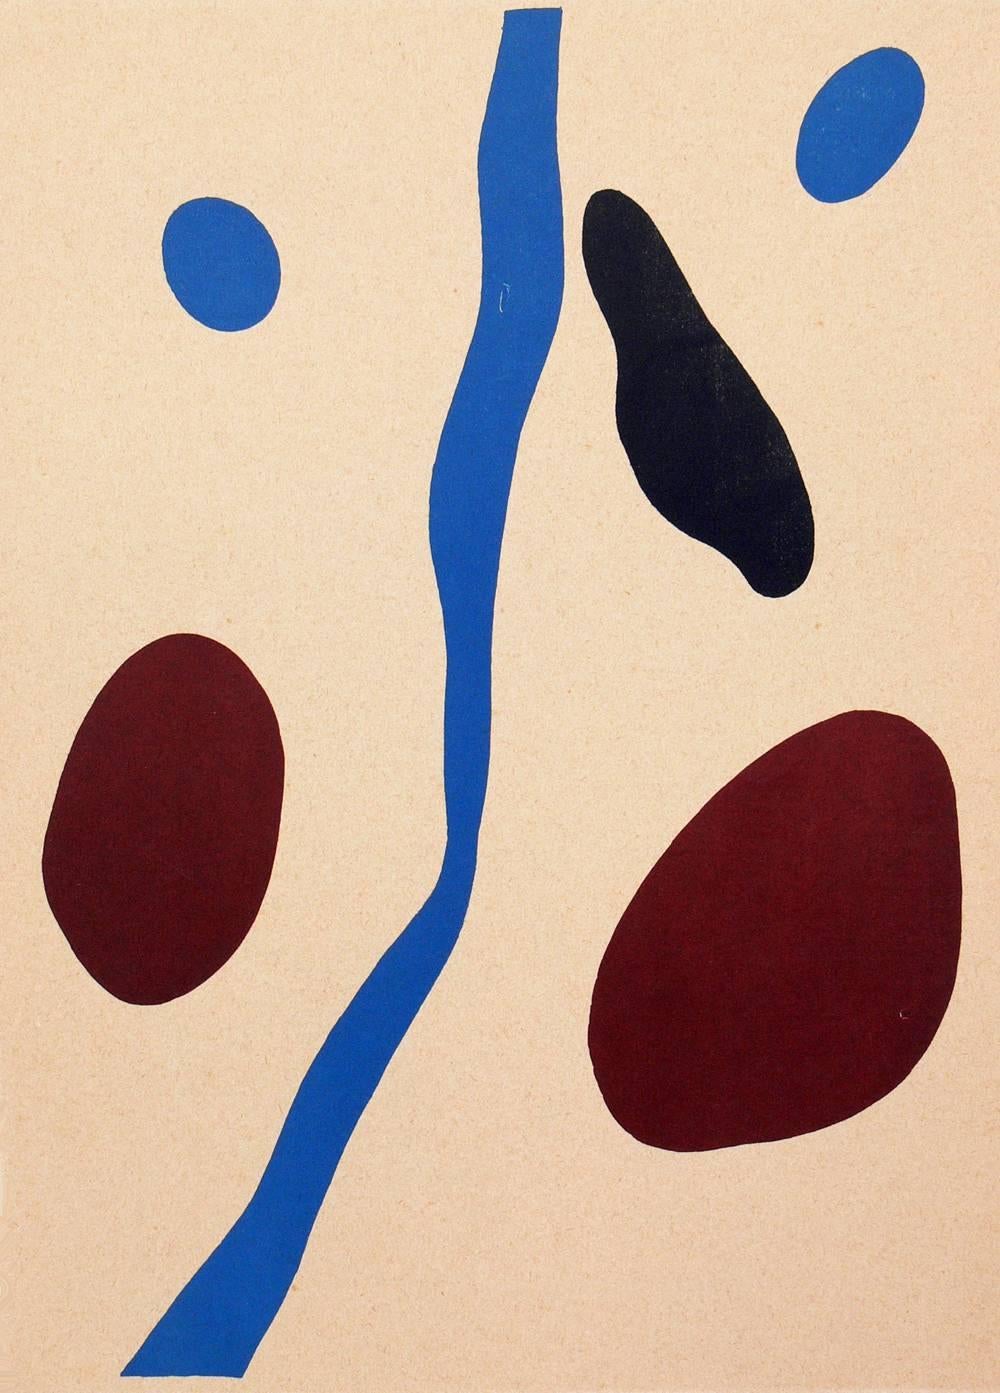 Jean Arp lithographs or etchings, circa 1930s. They have been framed in clean lined black lacquer gallery frames. The larger lithograph measures 18